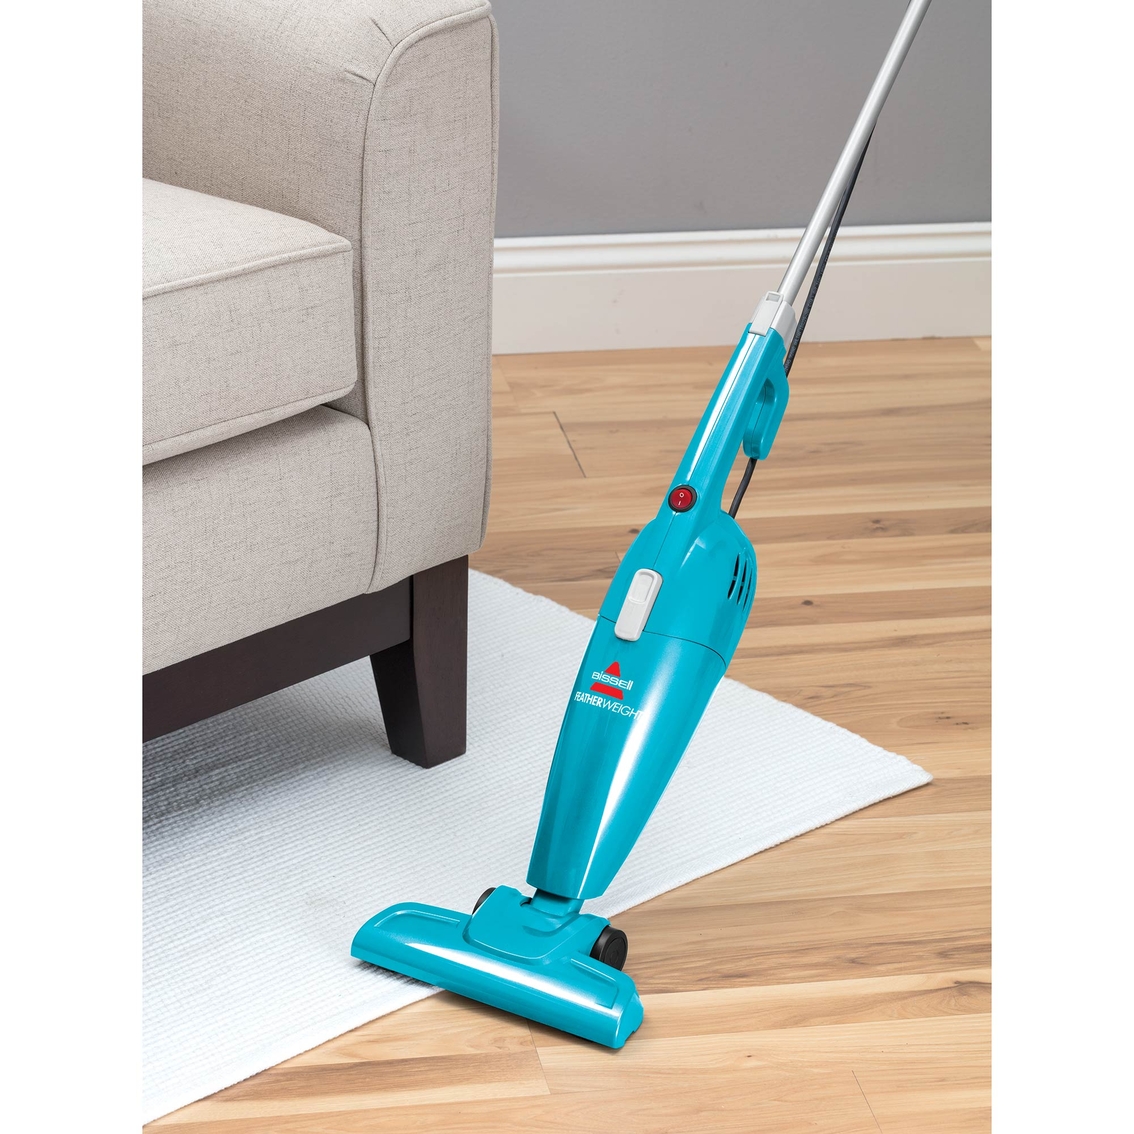 Bissell FeatherWeight Stick Vacuum - Image 2 of 4